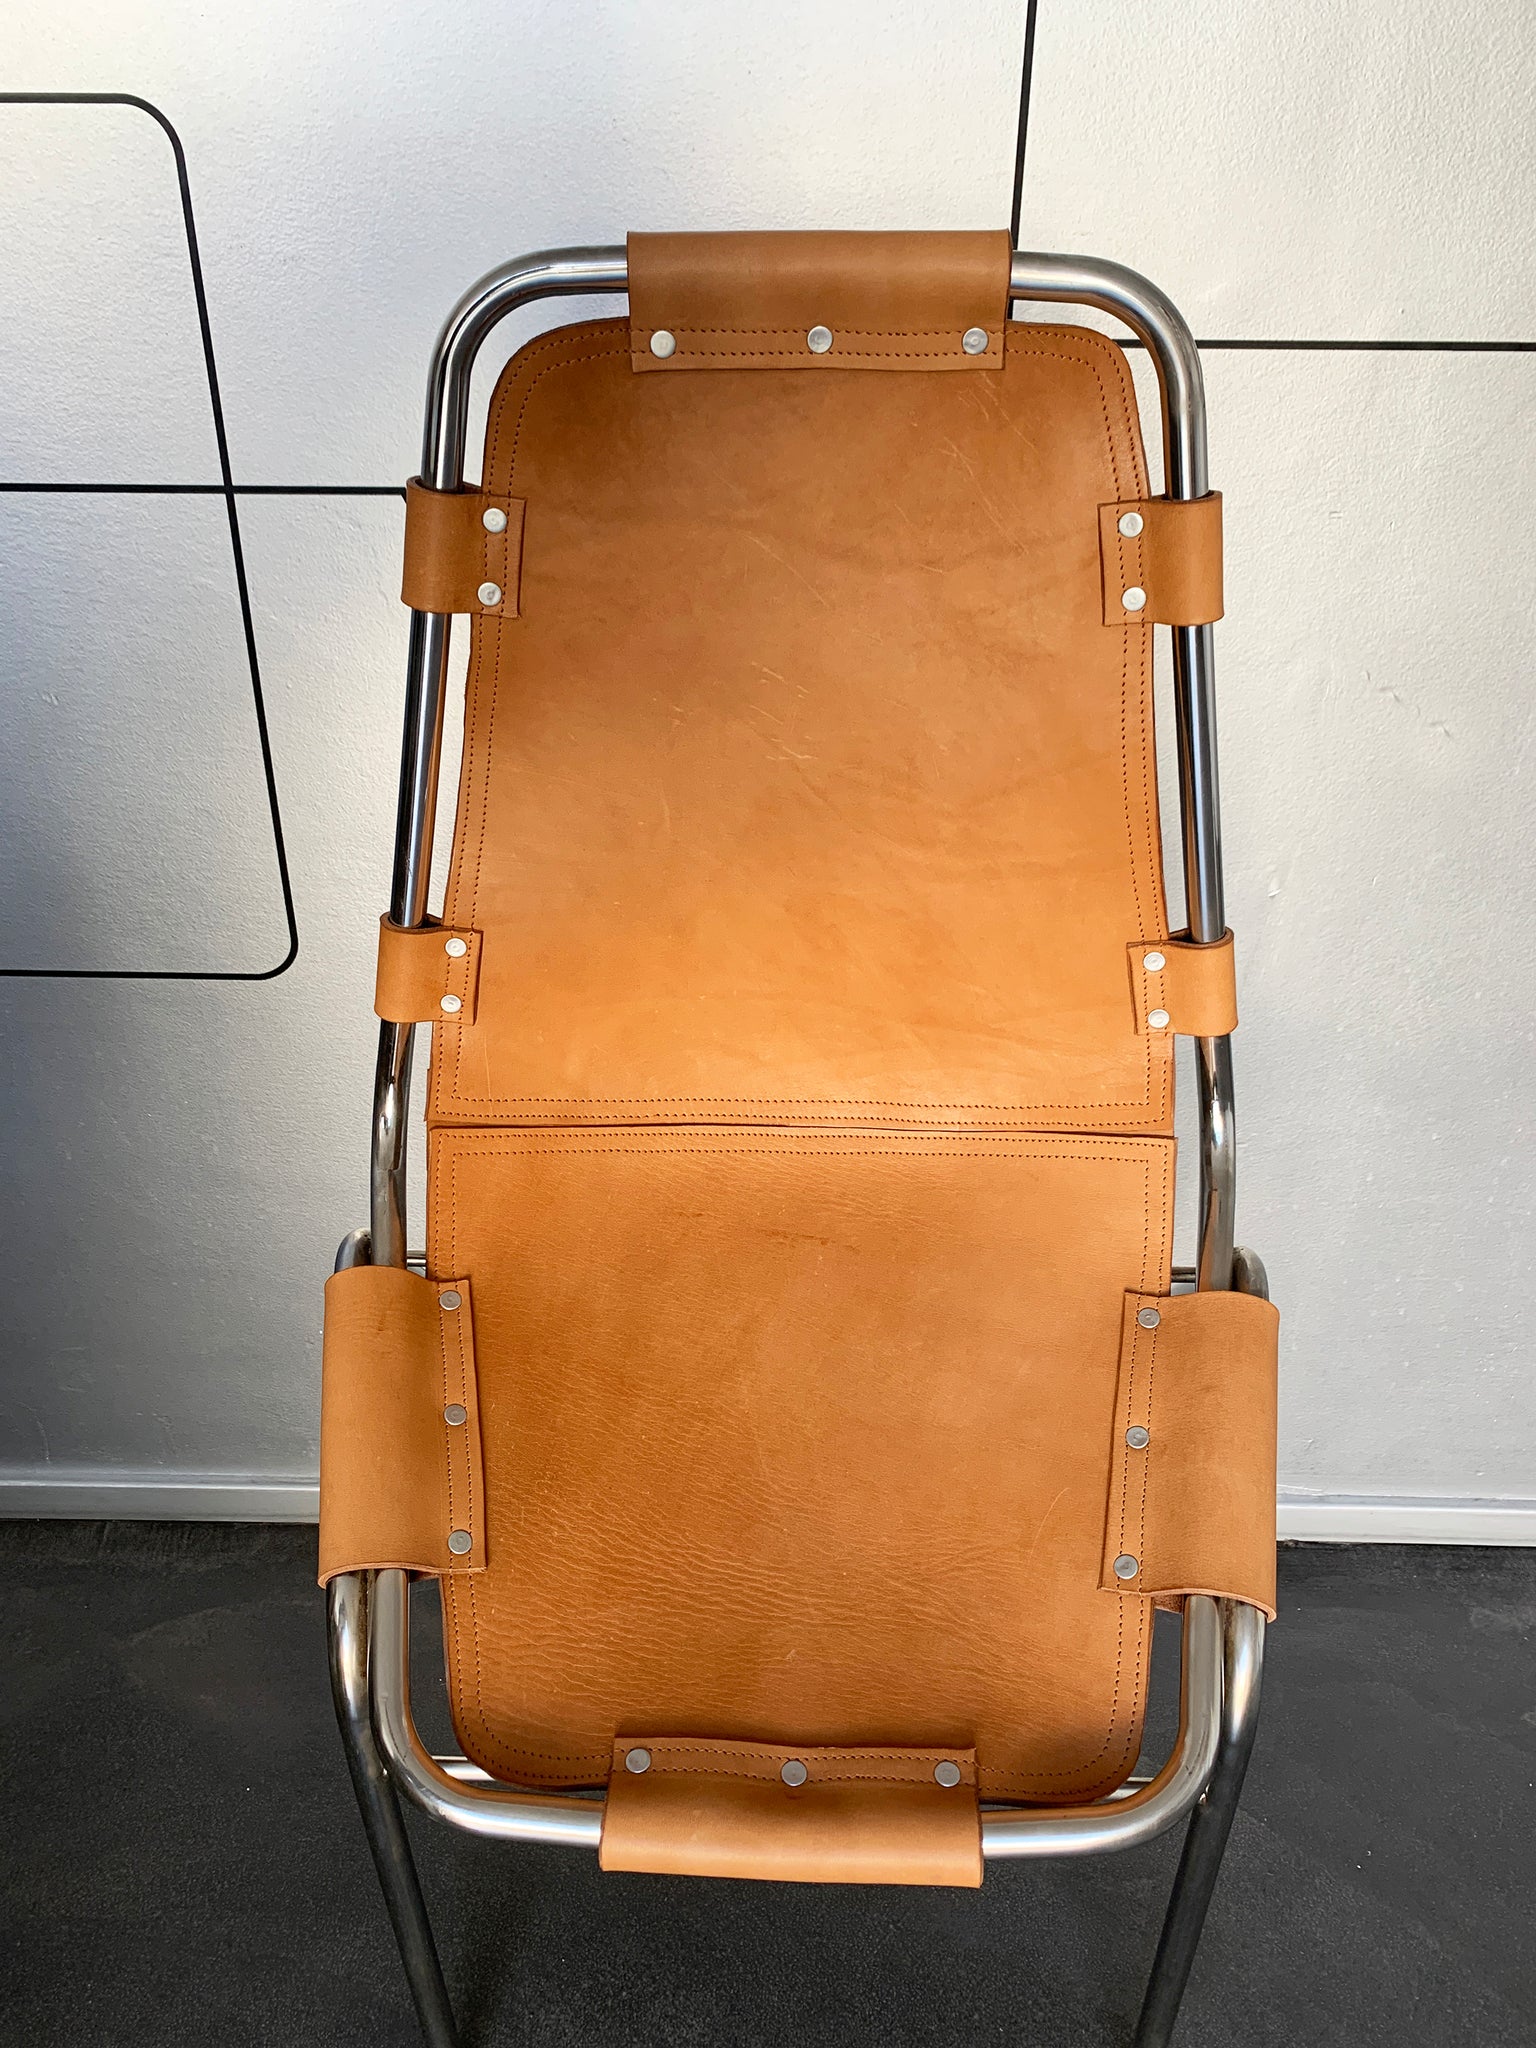 Vintage Les Arcs Dining Chair by Charlotte Perriand N°2, 1960s – Bert  Mauritz